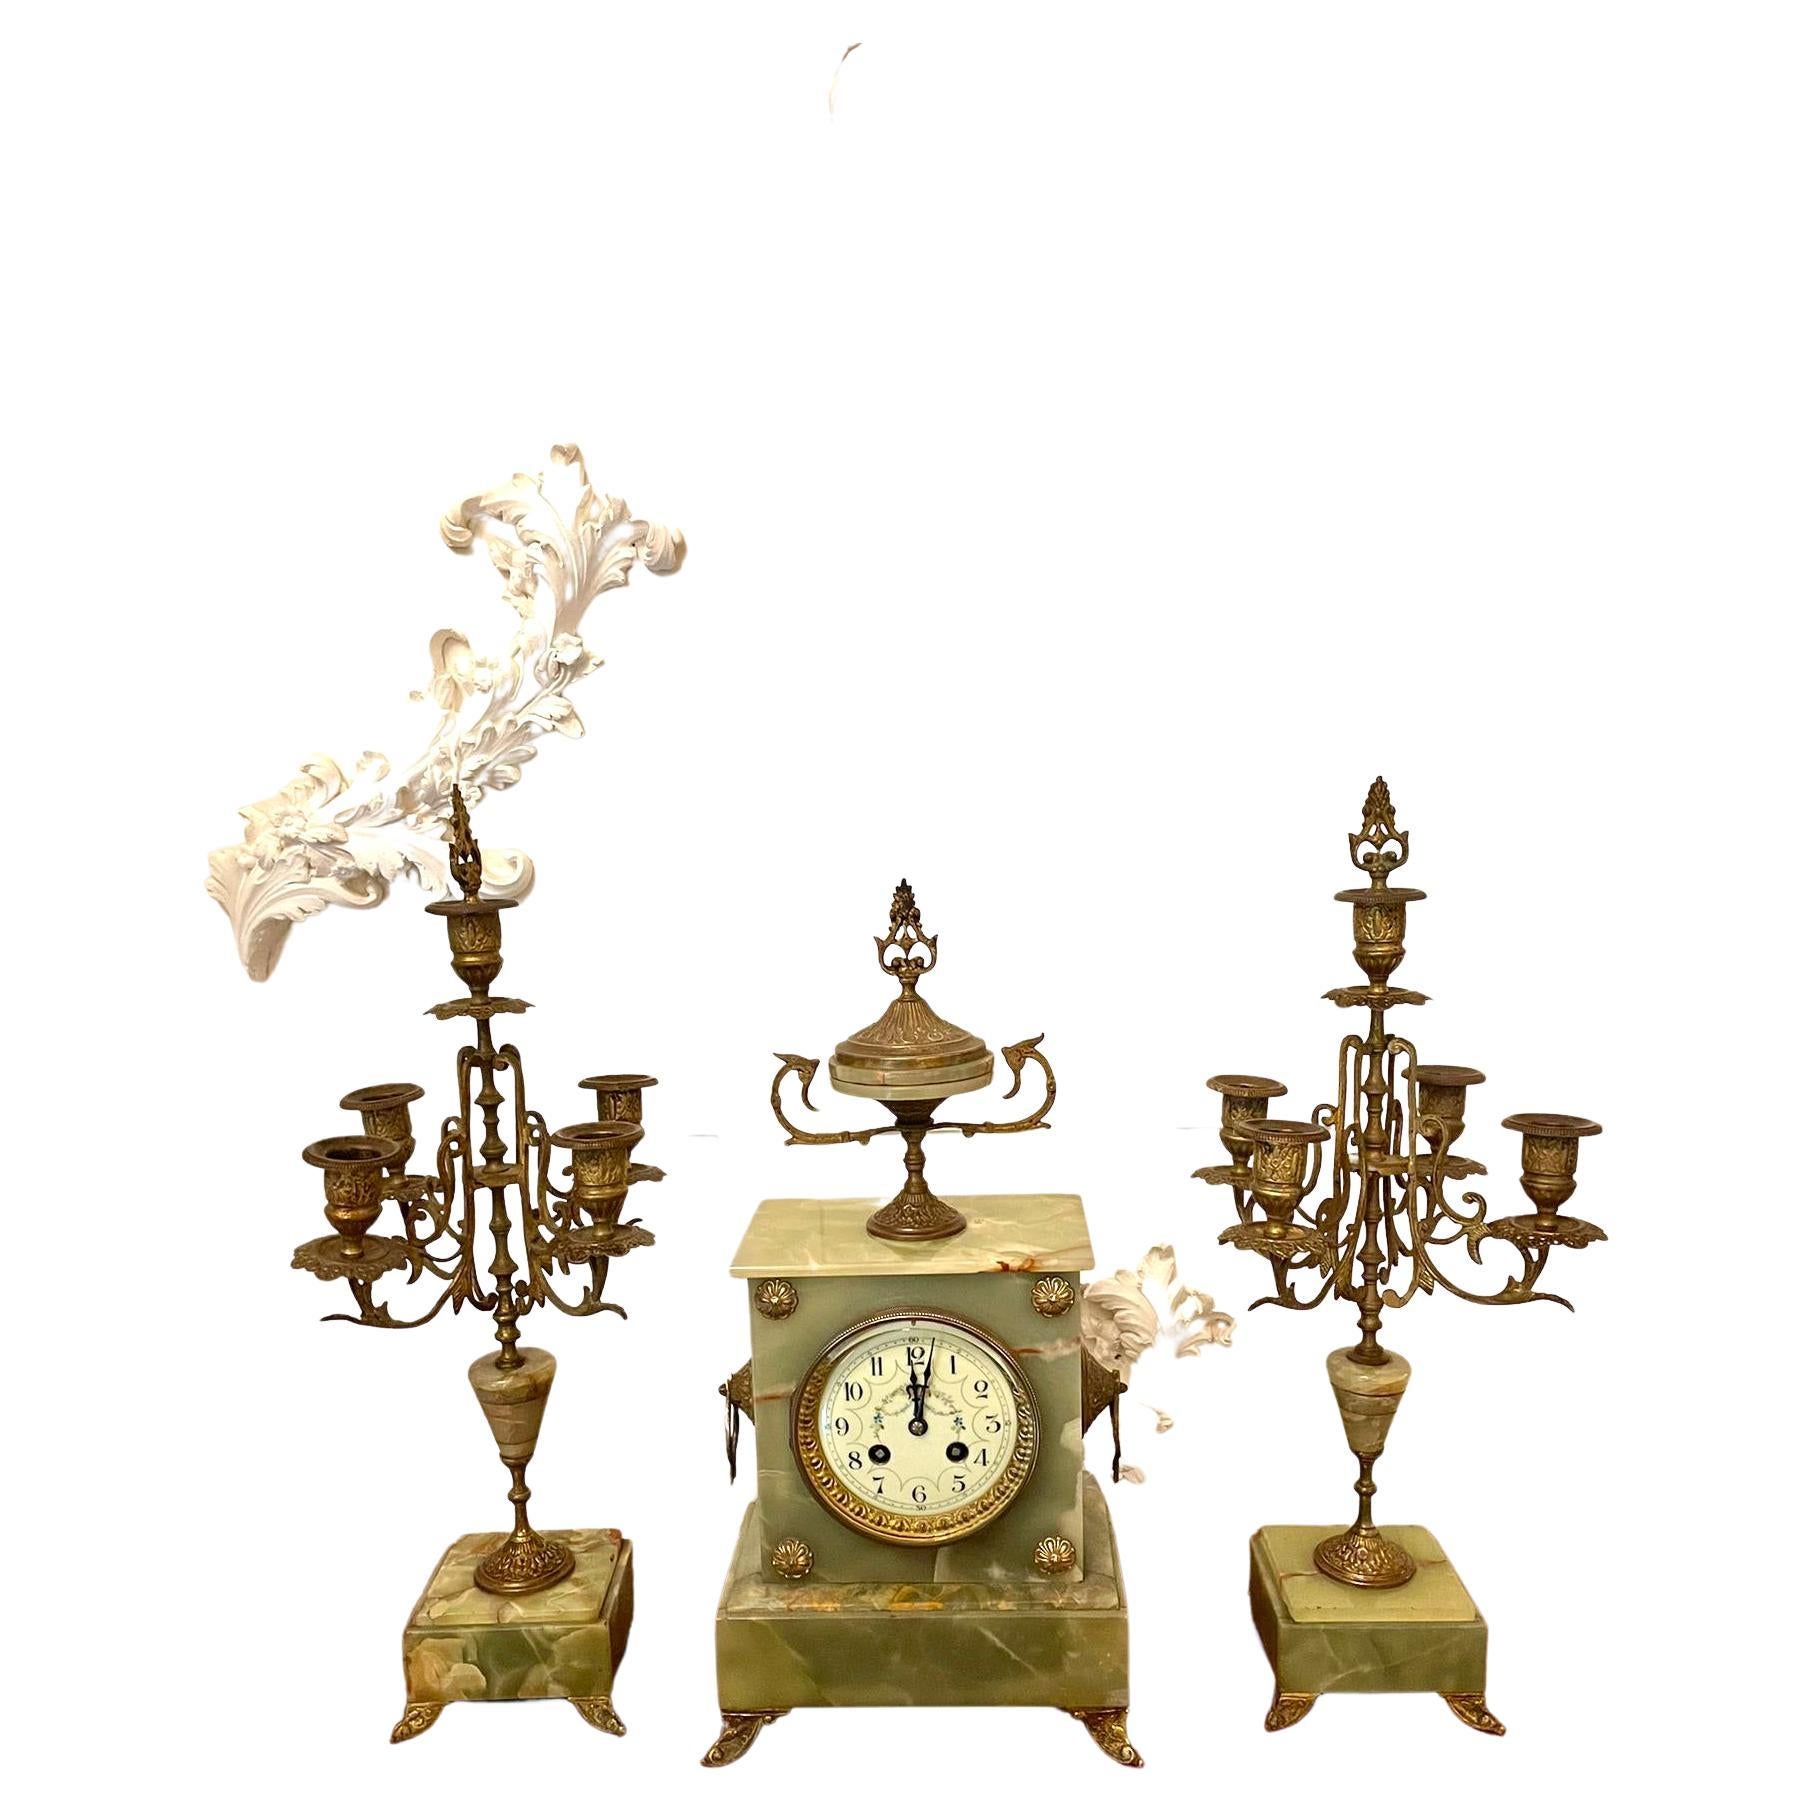 Antique Victorian quality green onyx ornate clock garniture having a quality circular floral decorated dial with original hands, eight day movement striking the hour and half hour on a bell. The case is surmounted by an urn with carrying handles to